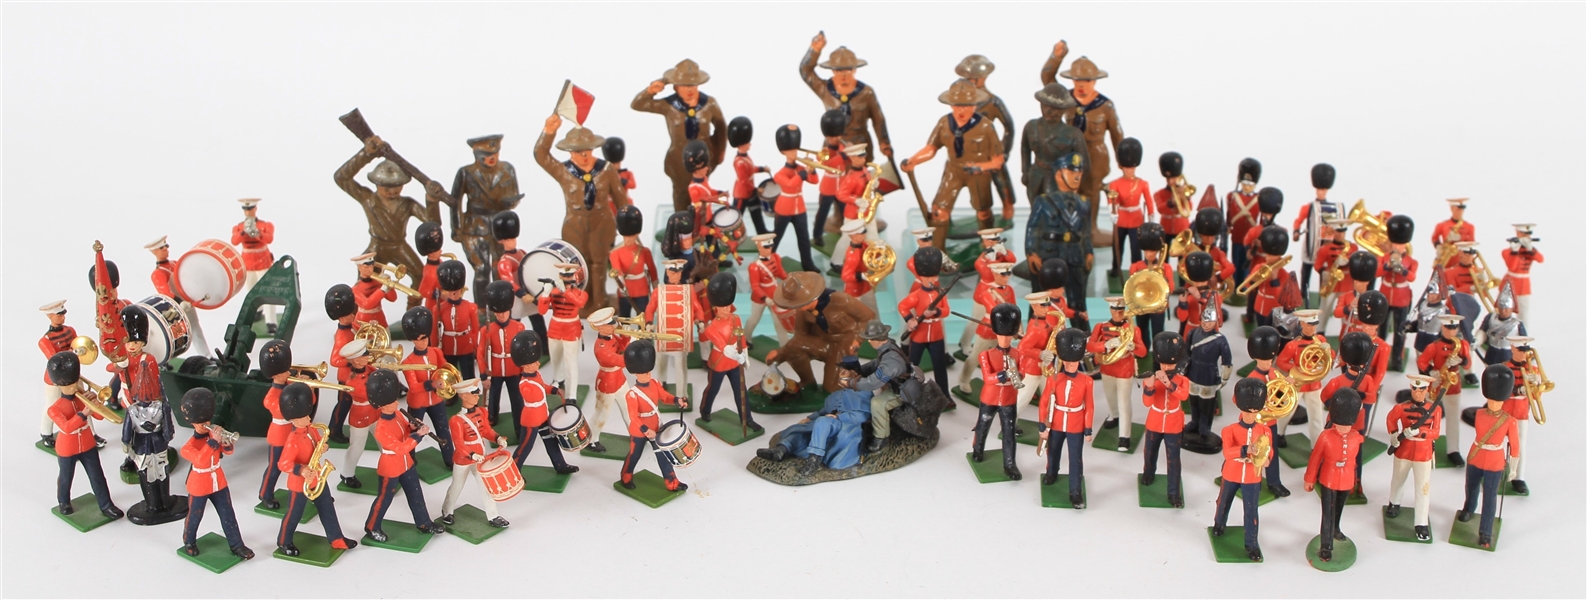 1950s-80s Marching Band & Military Figure Collection - Lot of 90